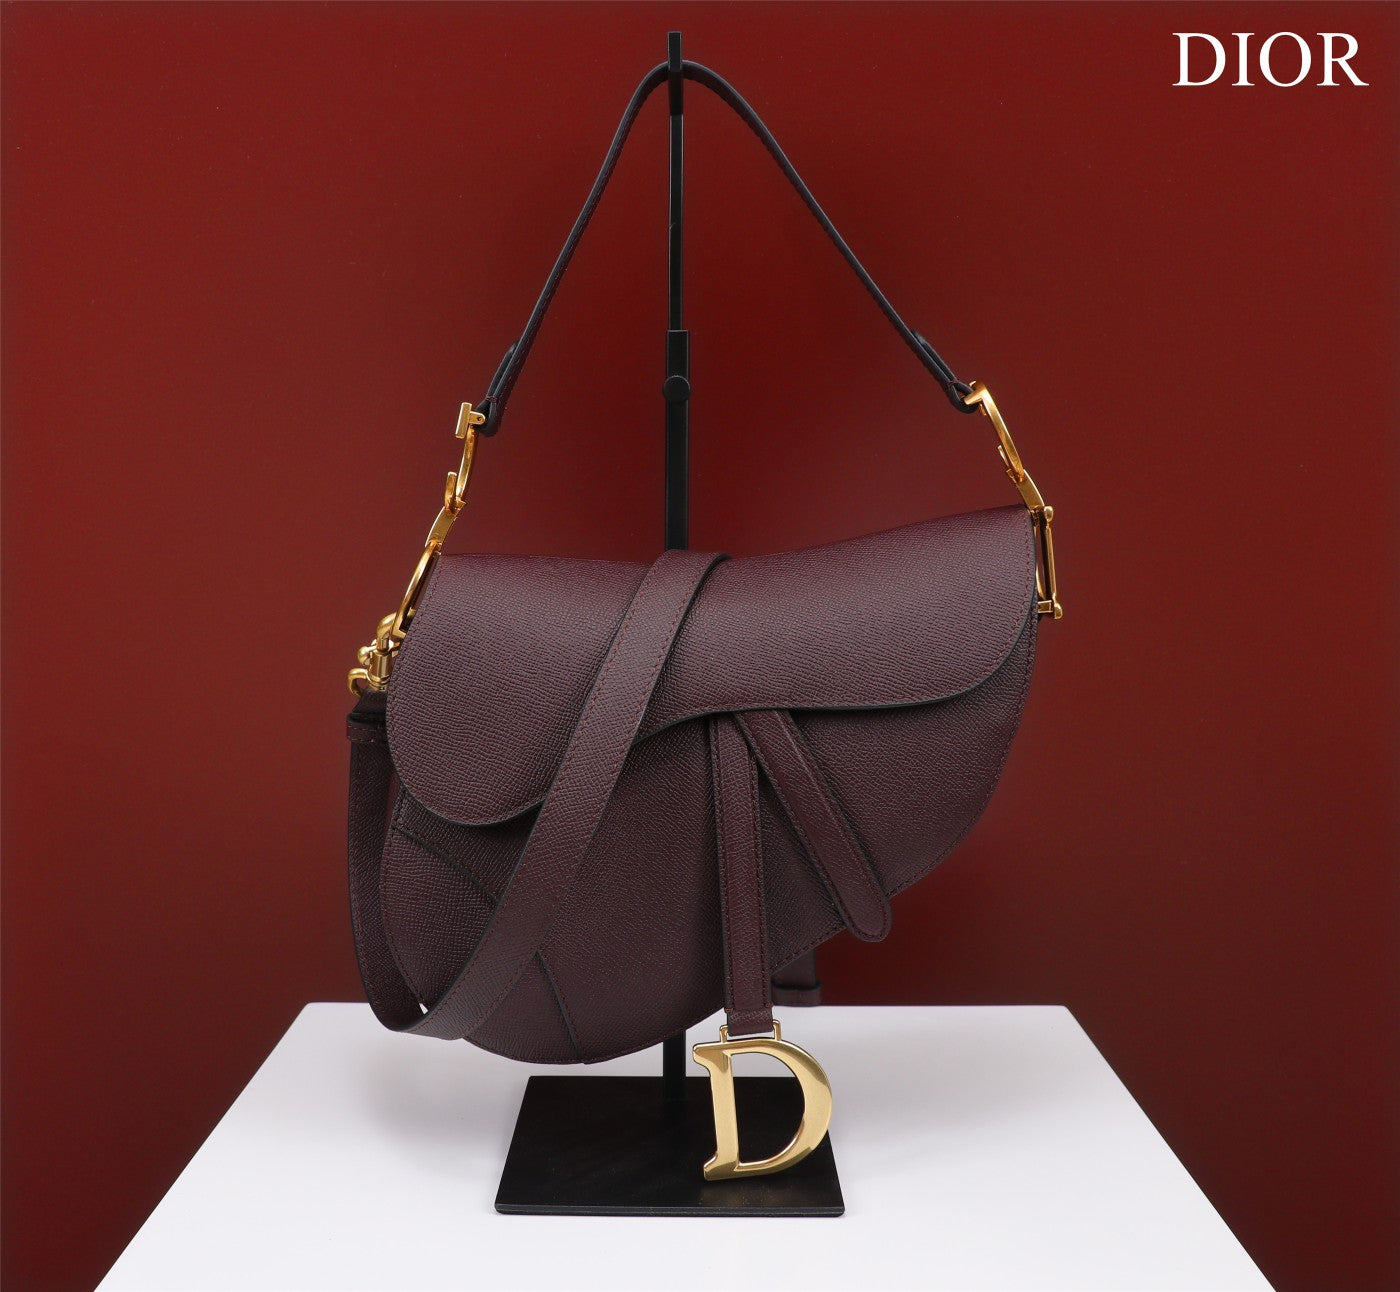 Dior Saddle bag in Grained calfskin leather